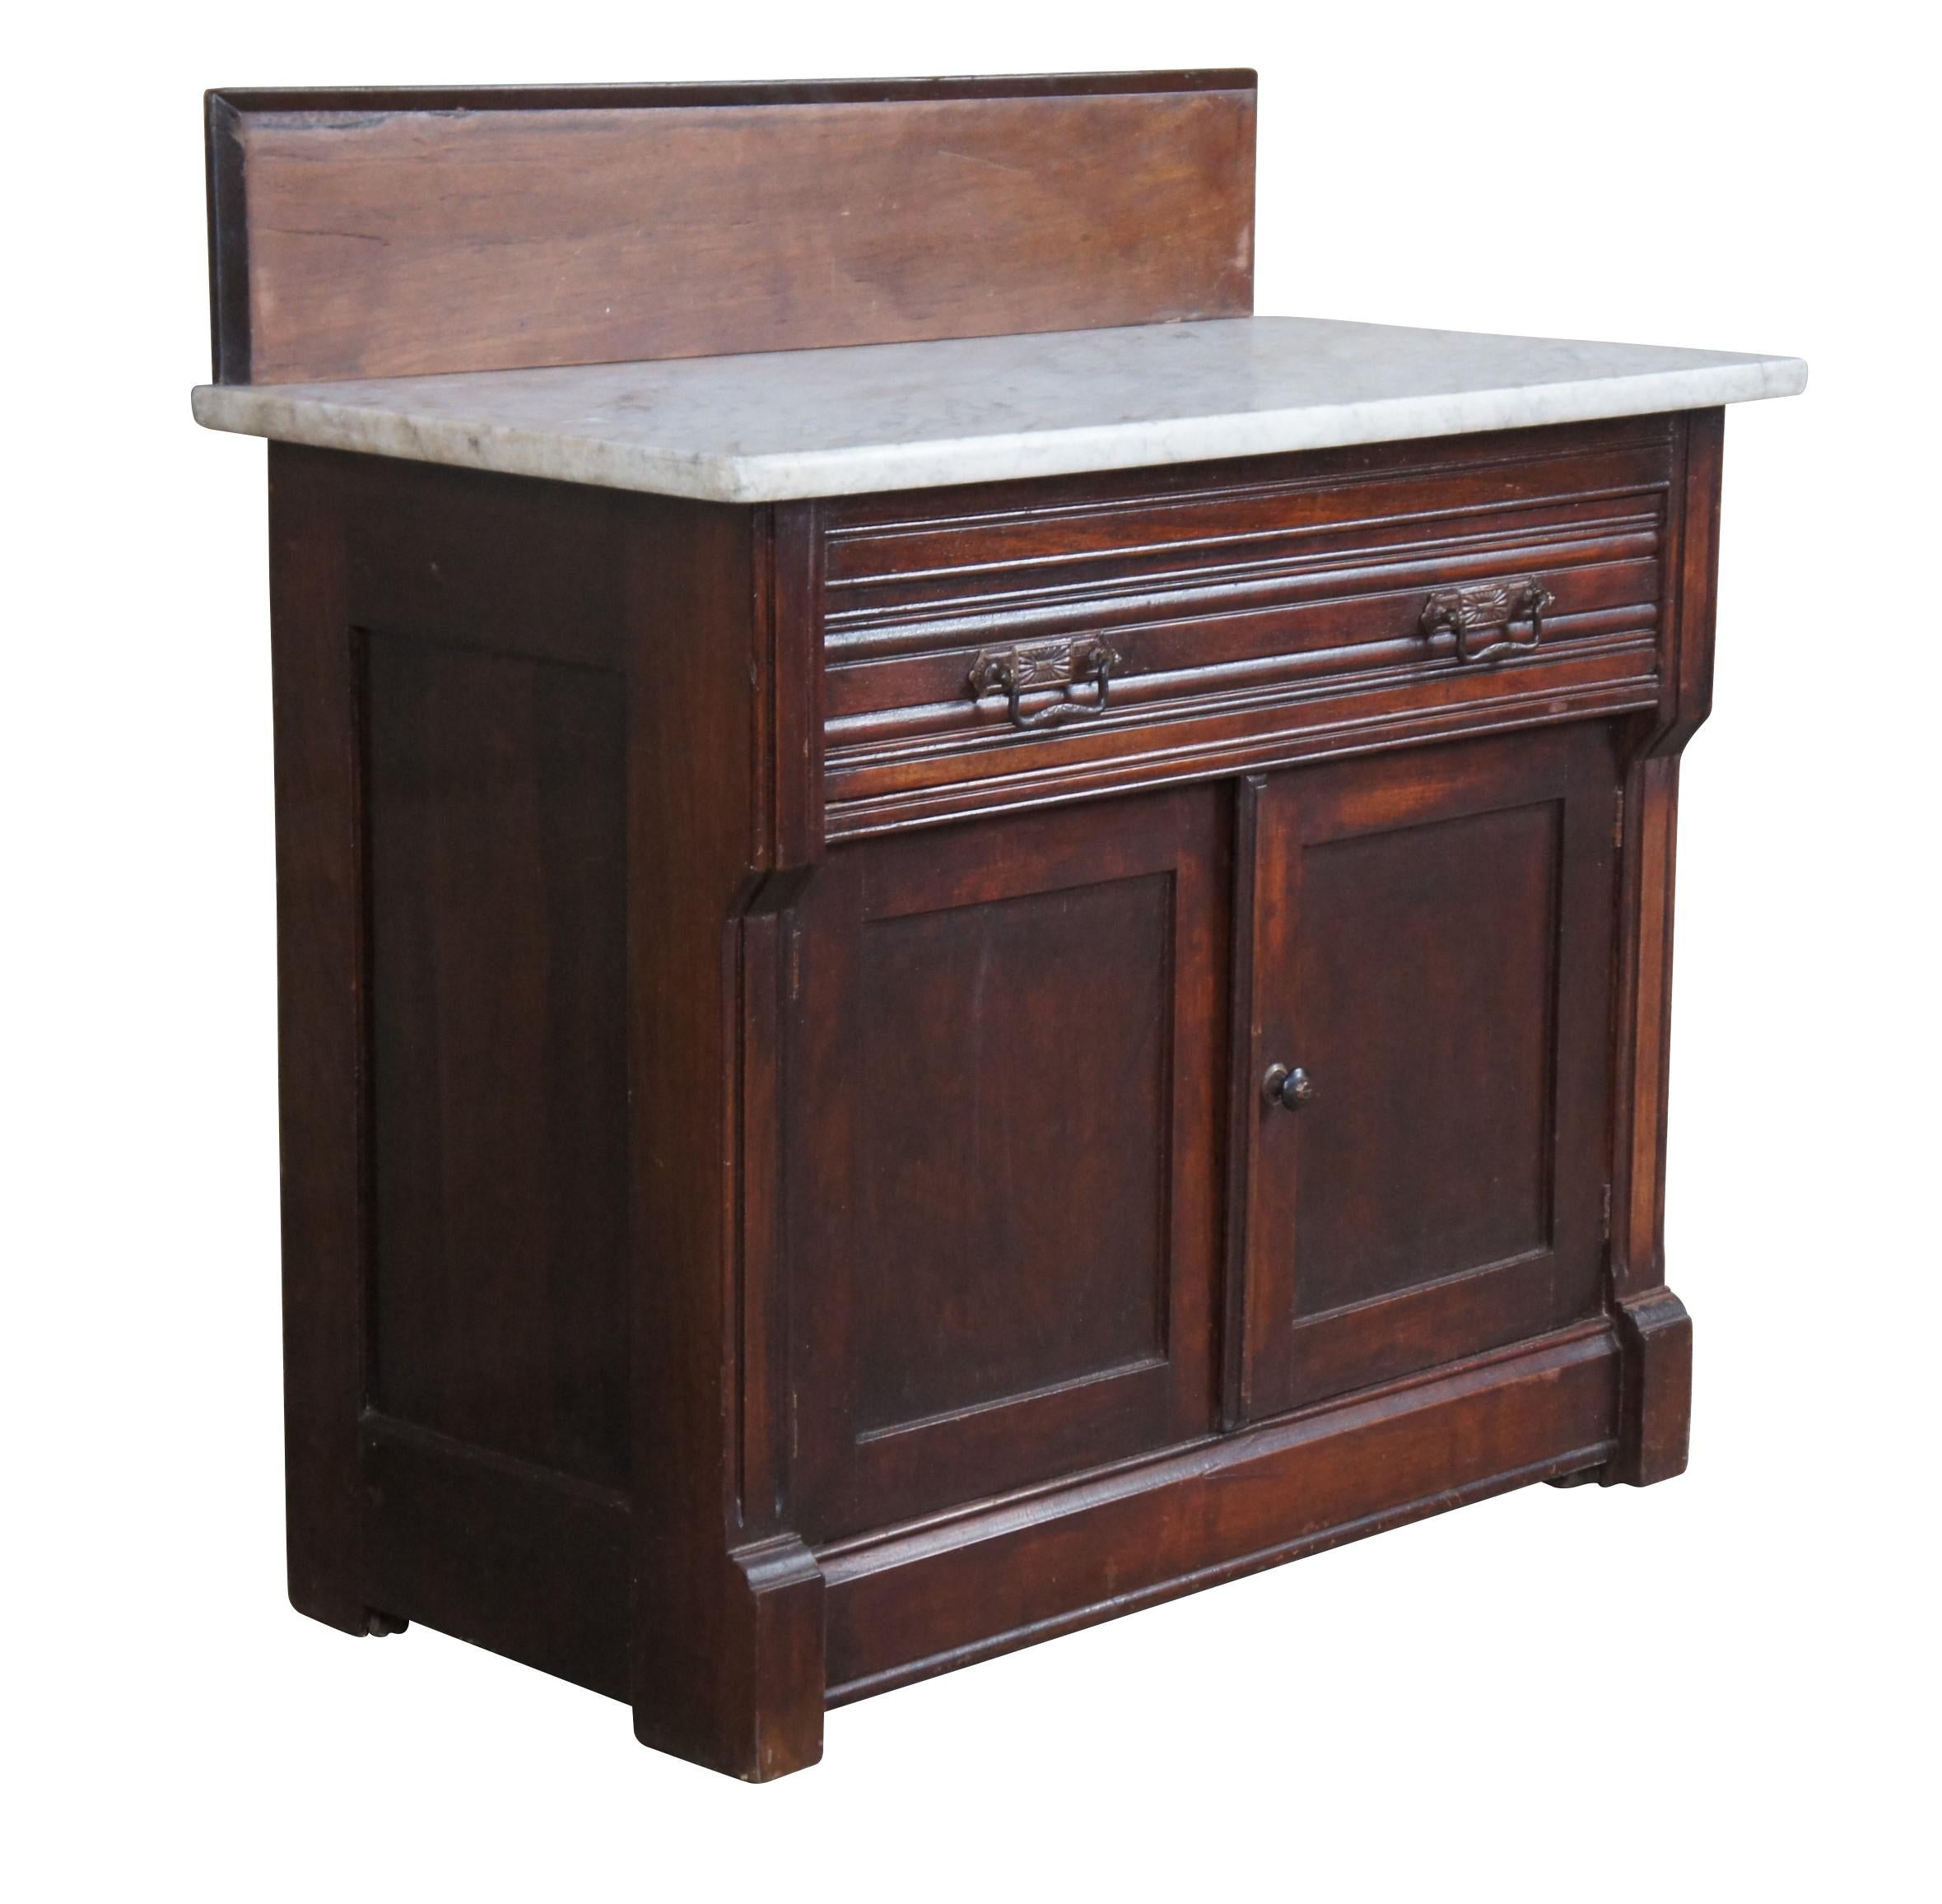 Antique Victorian Eastlake Mahogany Marble Top Wash Stand Basin Cabinet  In Fair Condition For Sale In Dayton, OH